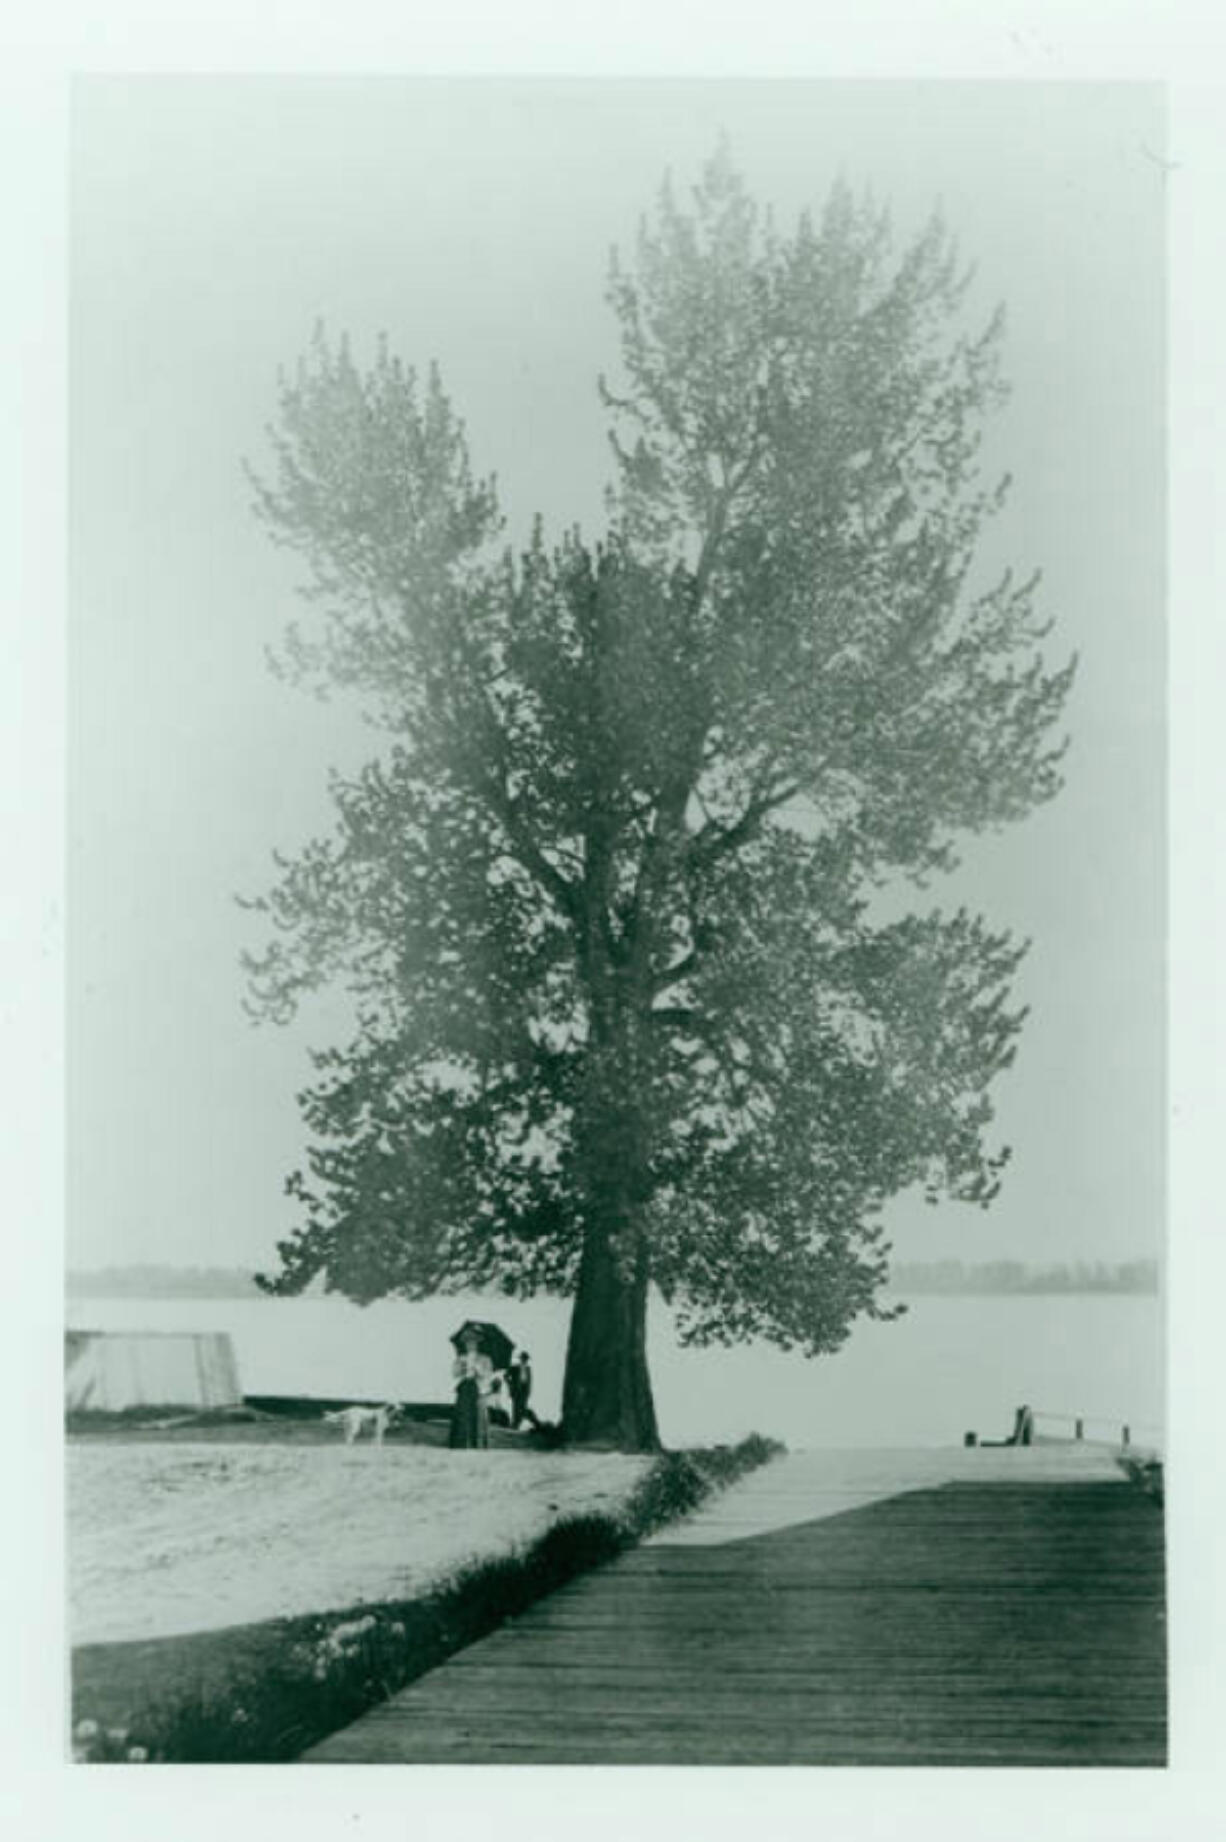 The Witness Tree, seen in this undated photo, was a legal point for surveys and property disputes for decades. In 1909, it fell as the Columbia River&rsquo;s north bank eroded.